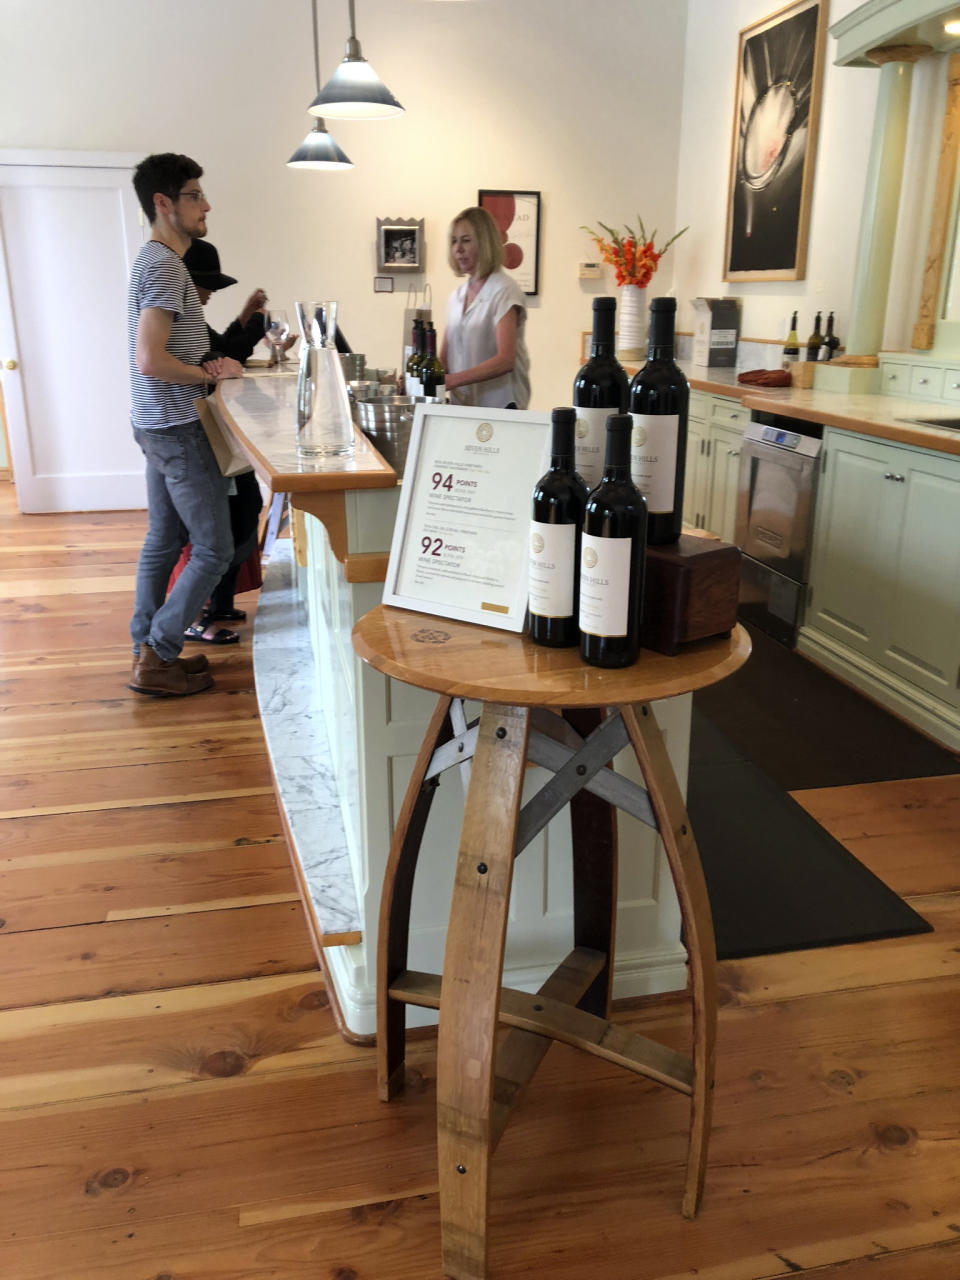 This Aug. 11, 2019 photo shows the rose menu at the SMAK Wines tasting room near the Walla Walla, Washington, airport. Southeastern Washington has been producing high-quality wines for decades. But in the past five years, the wineries of the Walla Walla Valley have drawn international accolades for the reds produced from the unique soil just across the border in Oregon. (AP Photo/Sally Carpenter Hale)